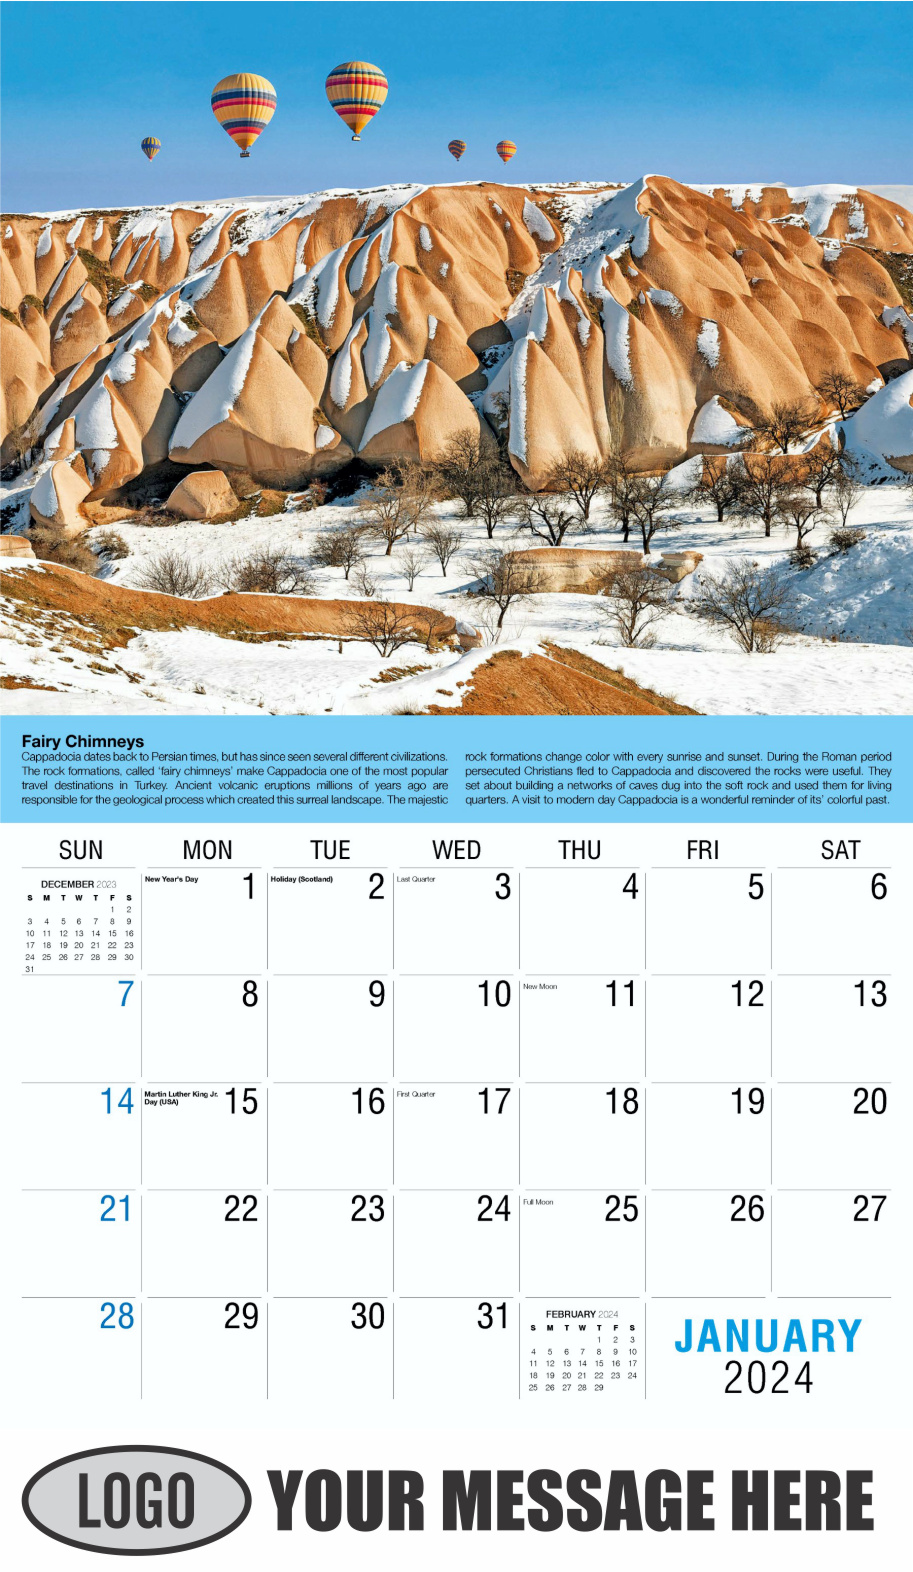 Planet Earth 2024 Business Promotional Wall Calendar - January